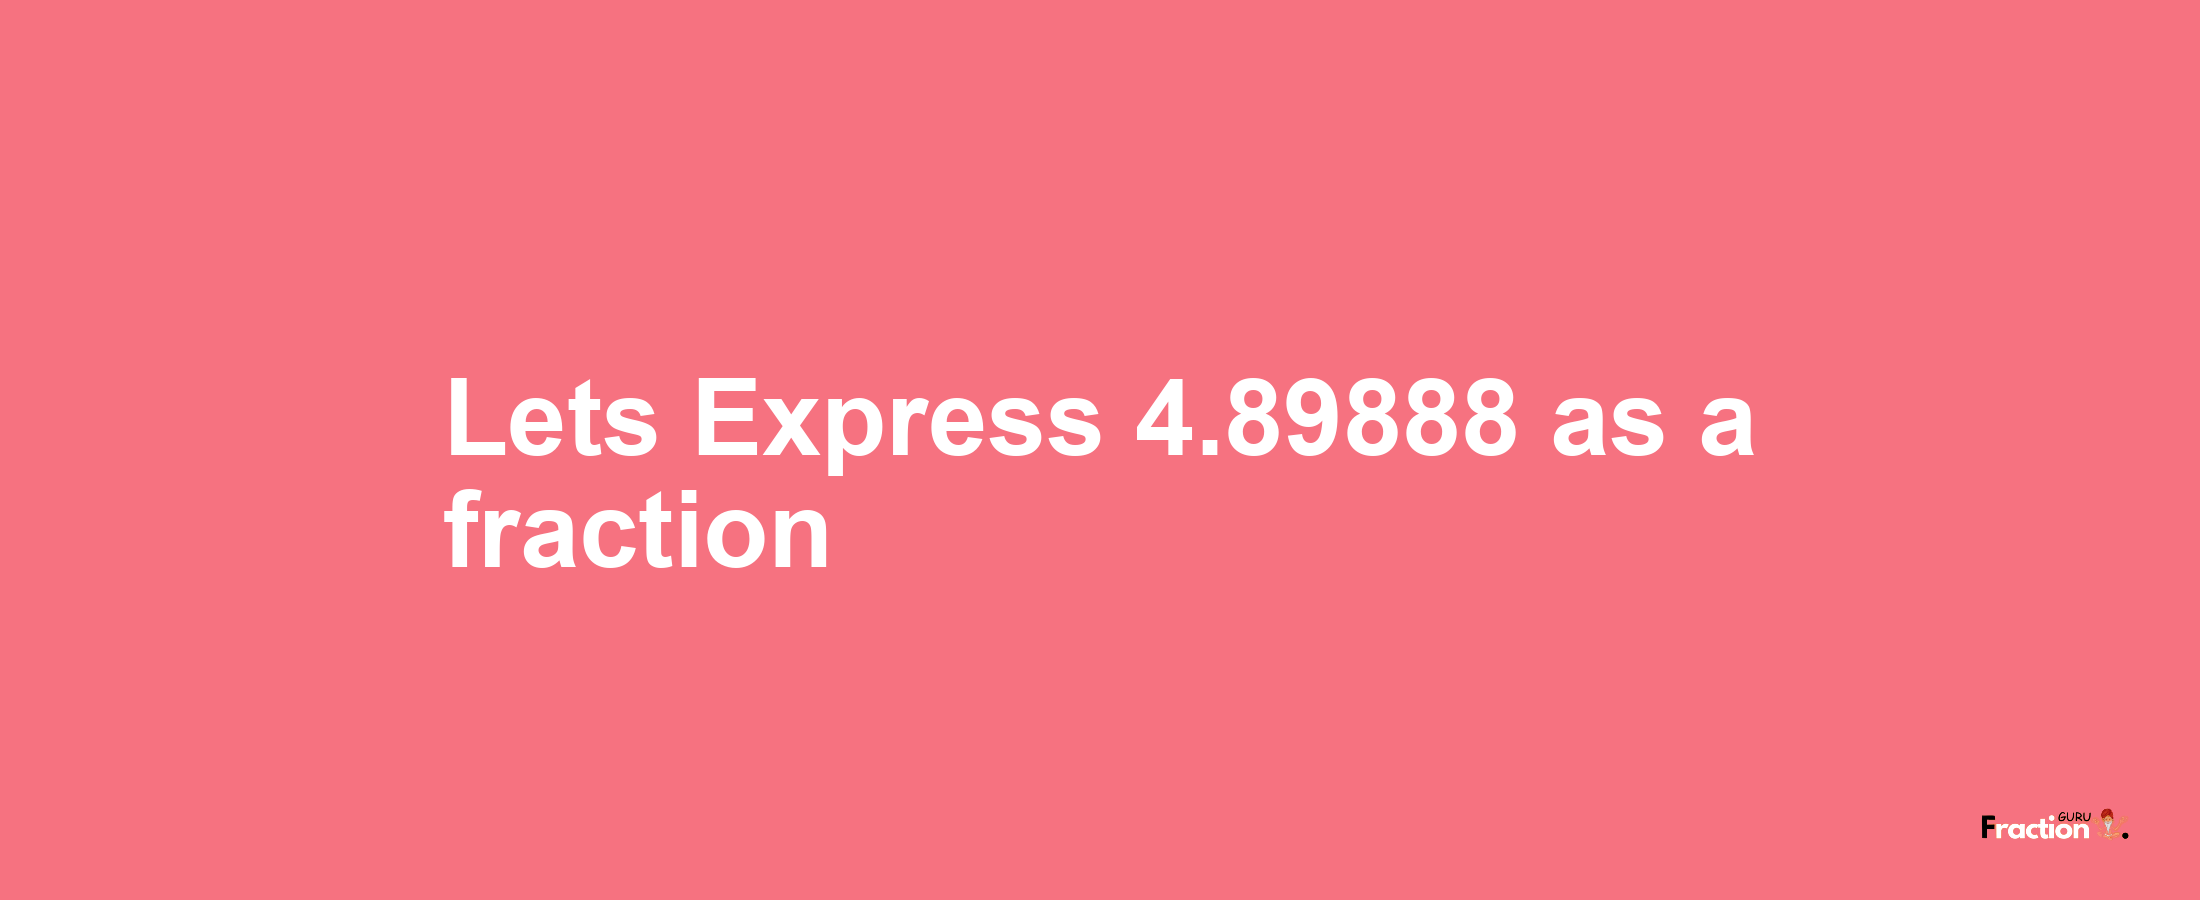 Lets Express 4.89888 as afraction